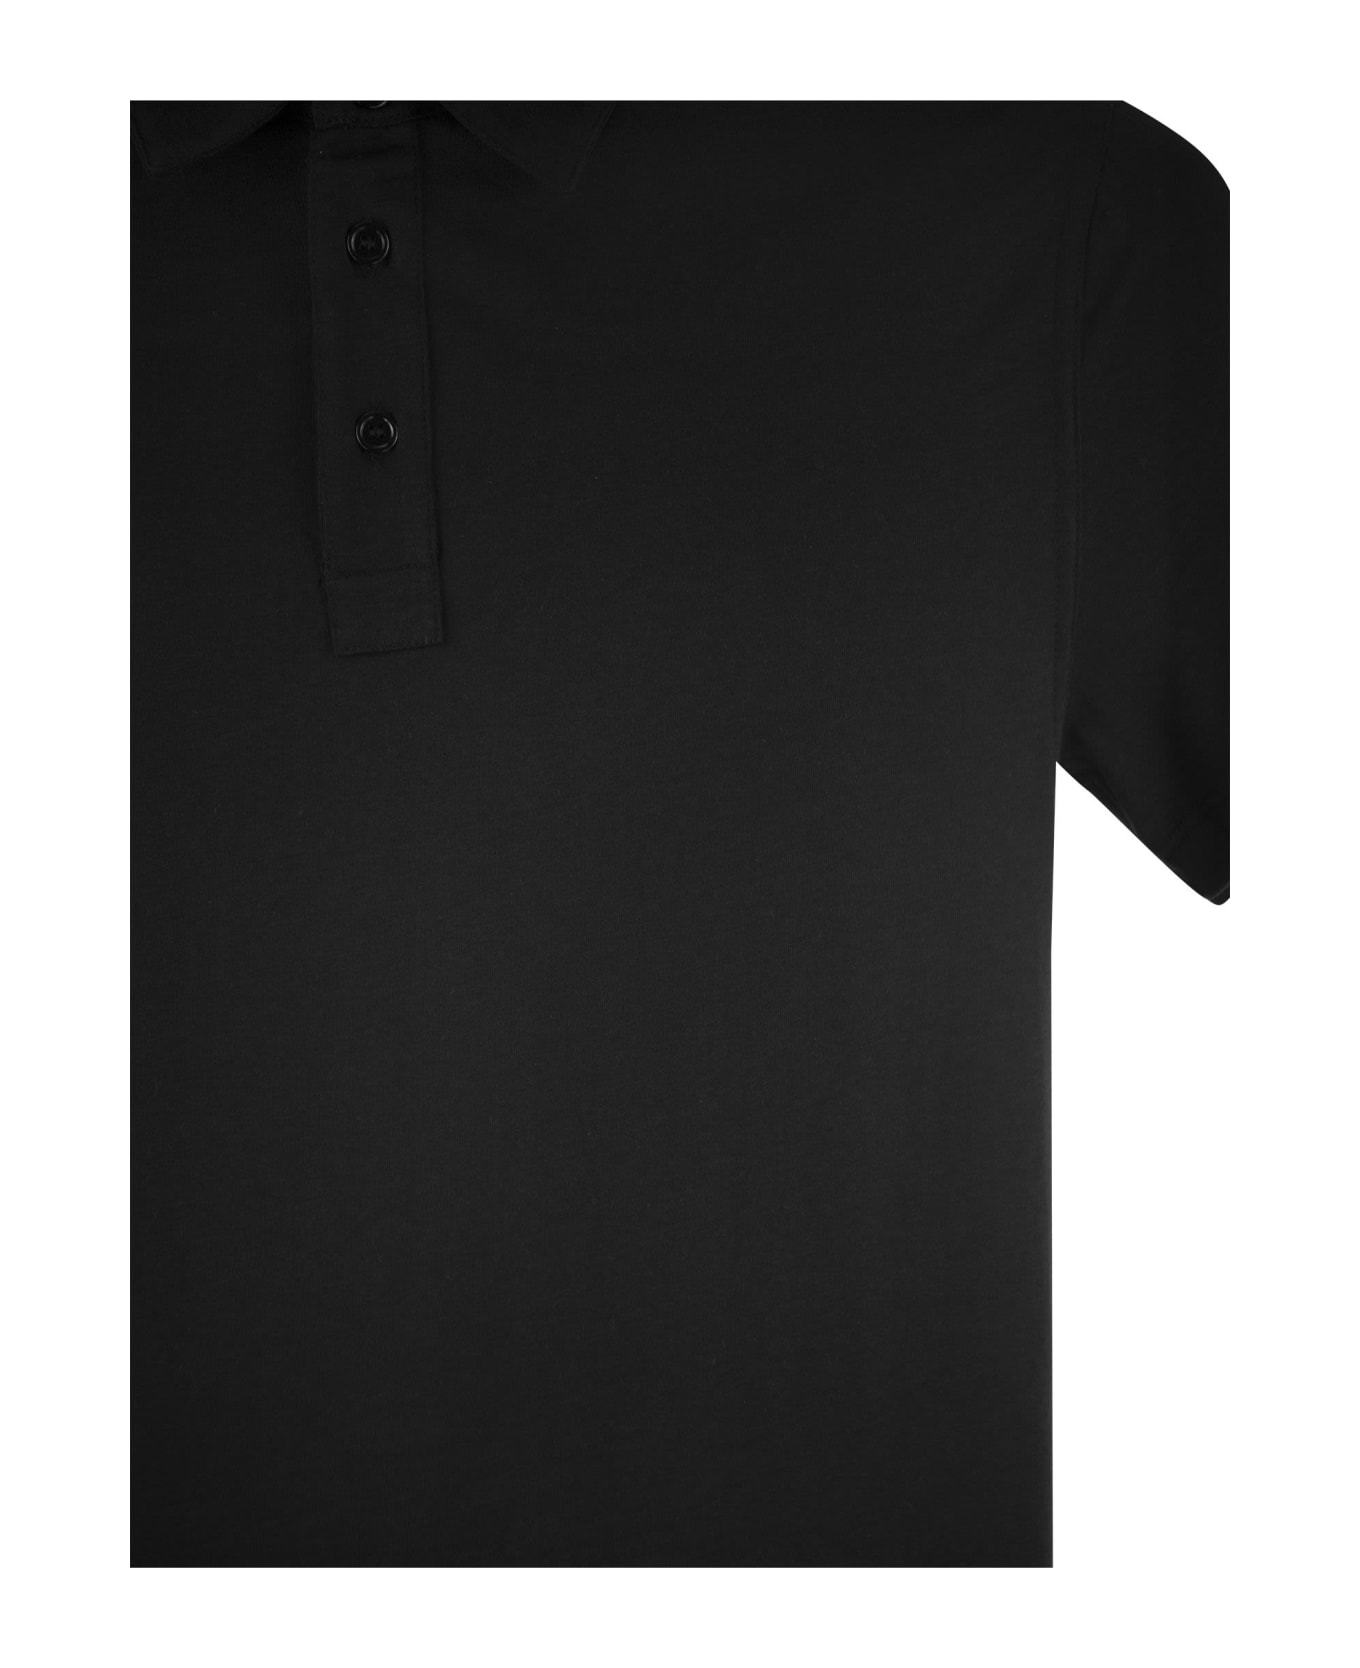 Majestic Filatures Short-sleeved Polo Shirt In Lyocell - noir ポロシャツ